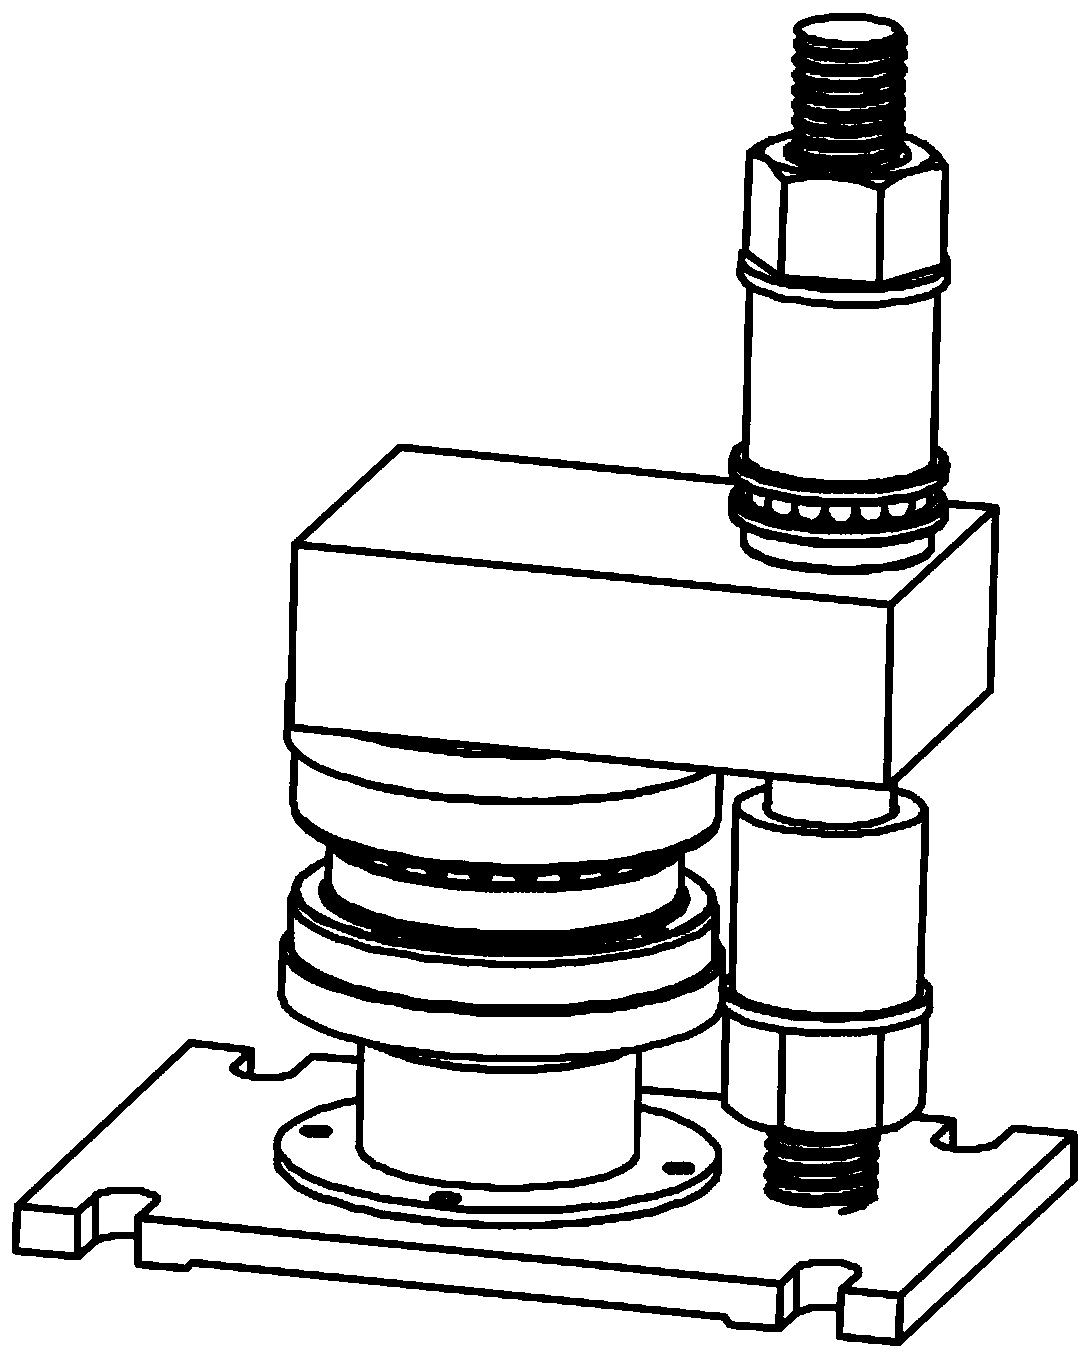 A test device and test method for the meshing ratio of the end gear of the servo tool post